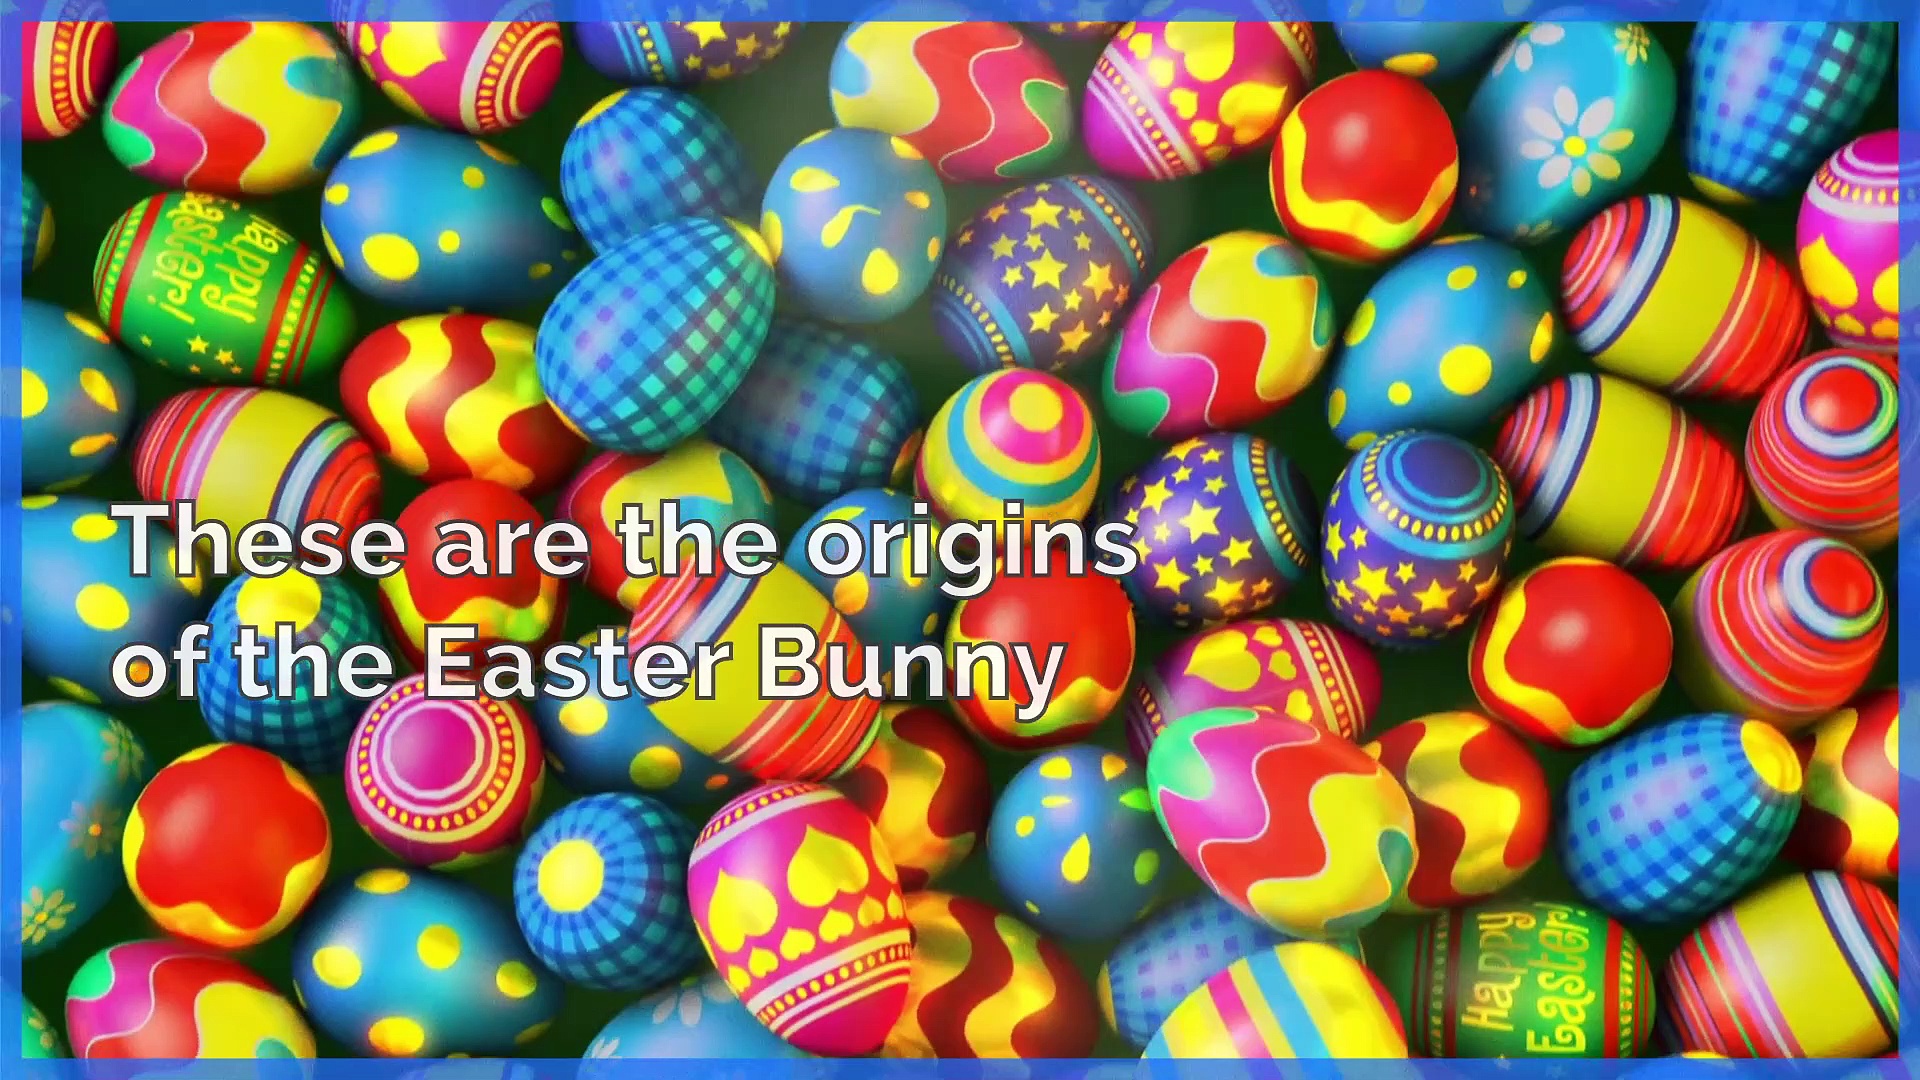 Origins of Easter bunny and why we eat chocolate Easter eggs explained